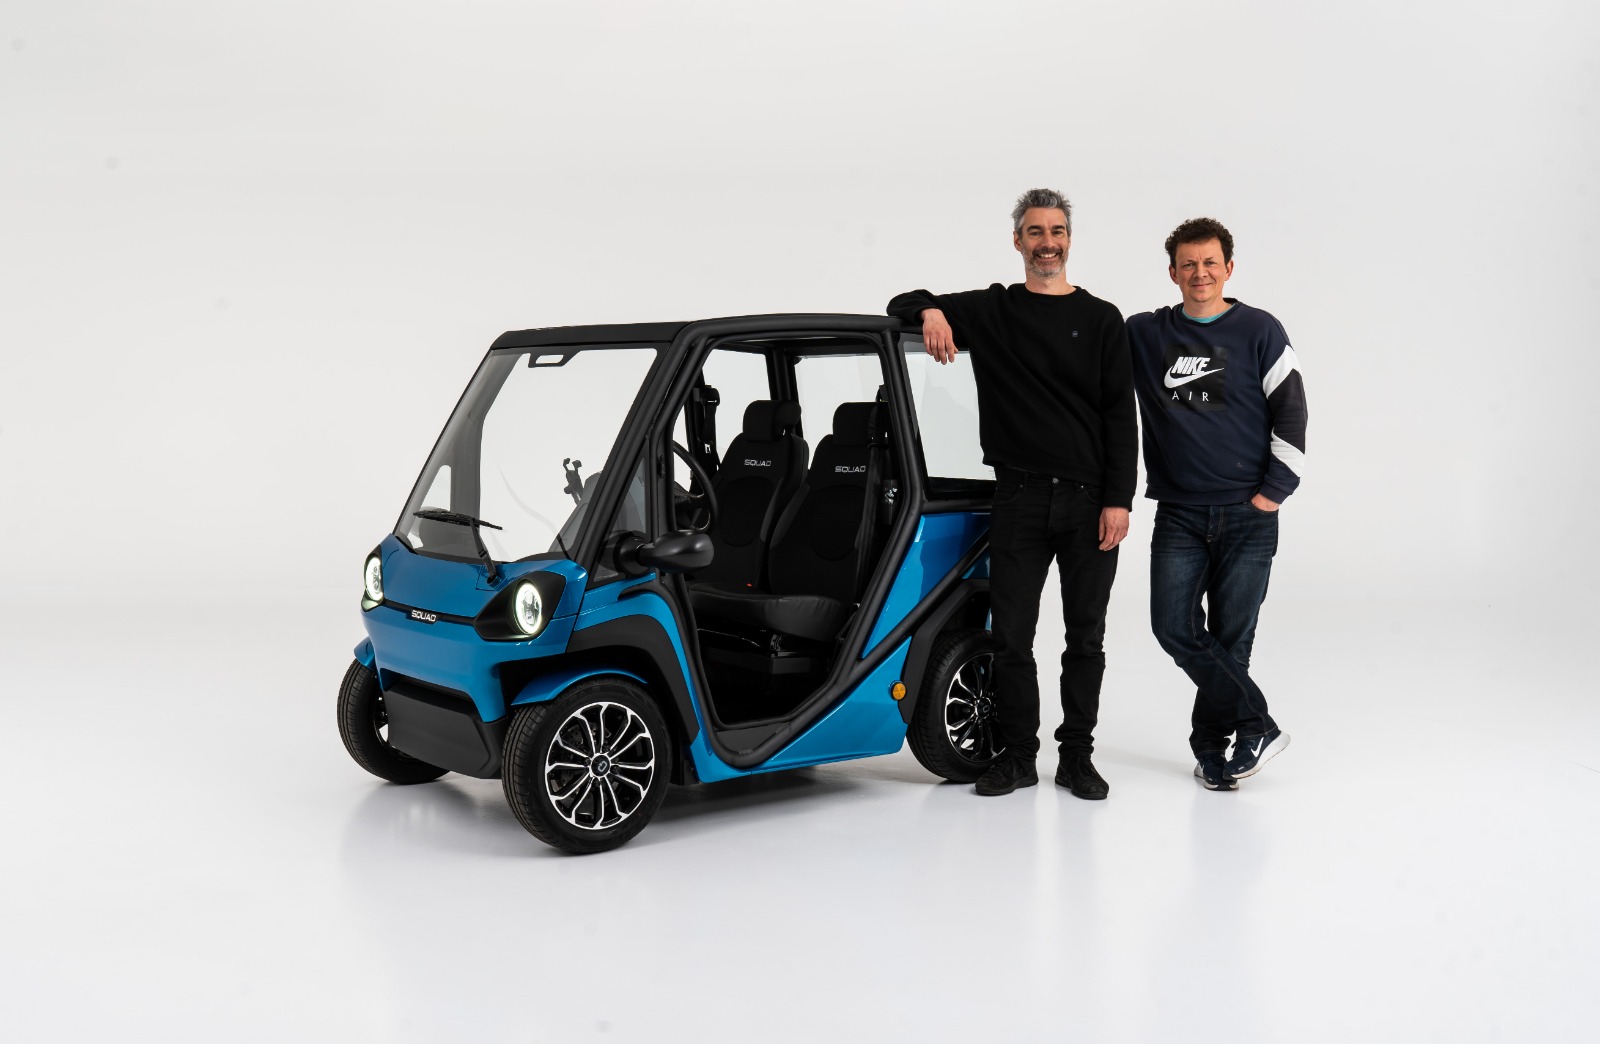 Squad: The world’s first Solar-Powered City Car for sharing and private use; the ultimate smart urban mobility solution for emissions, congestion and parking.